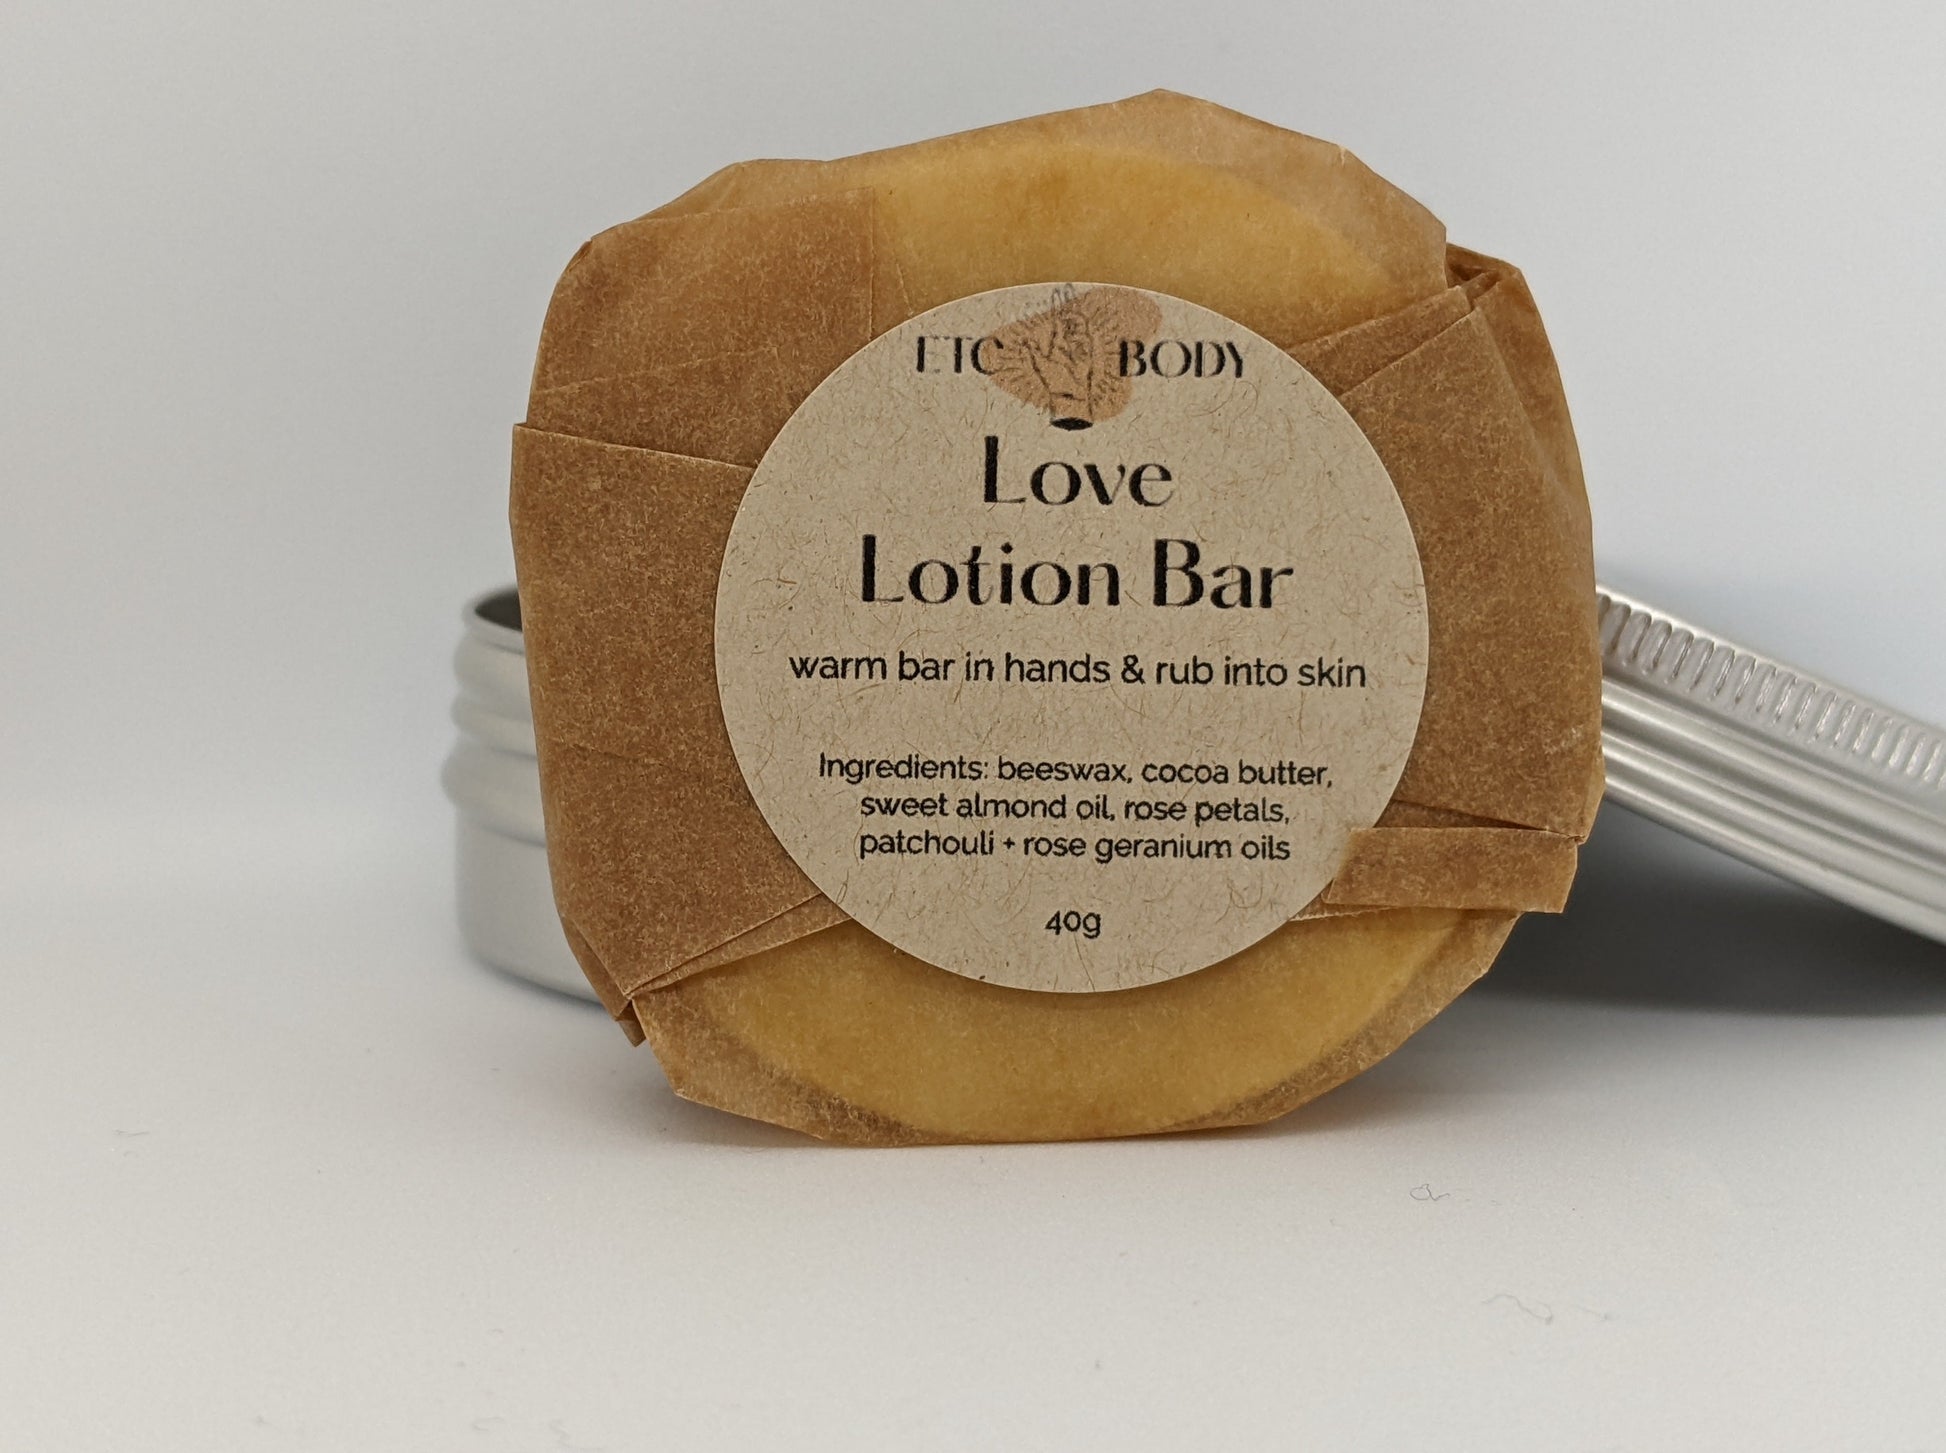 Love Lotion bar with rose petals and roe geranium oils. Warm bar in hands & rub into skin..ETC Body